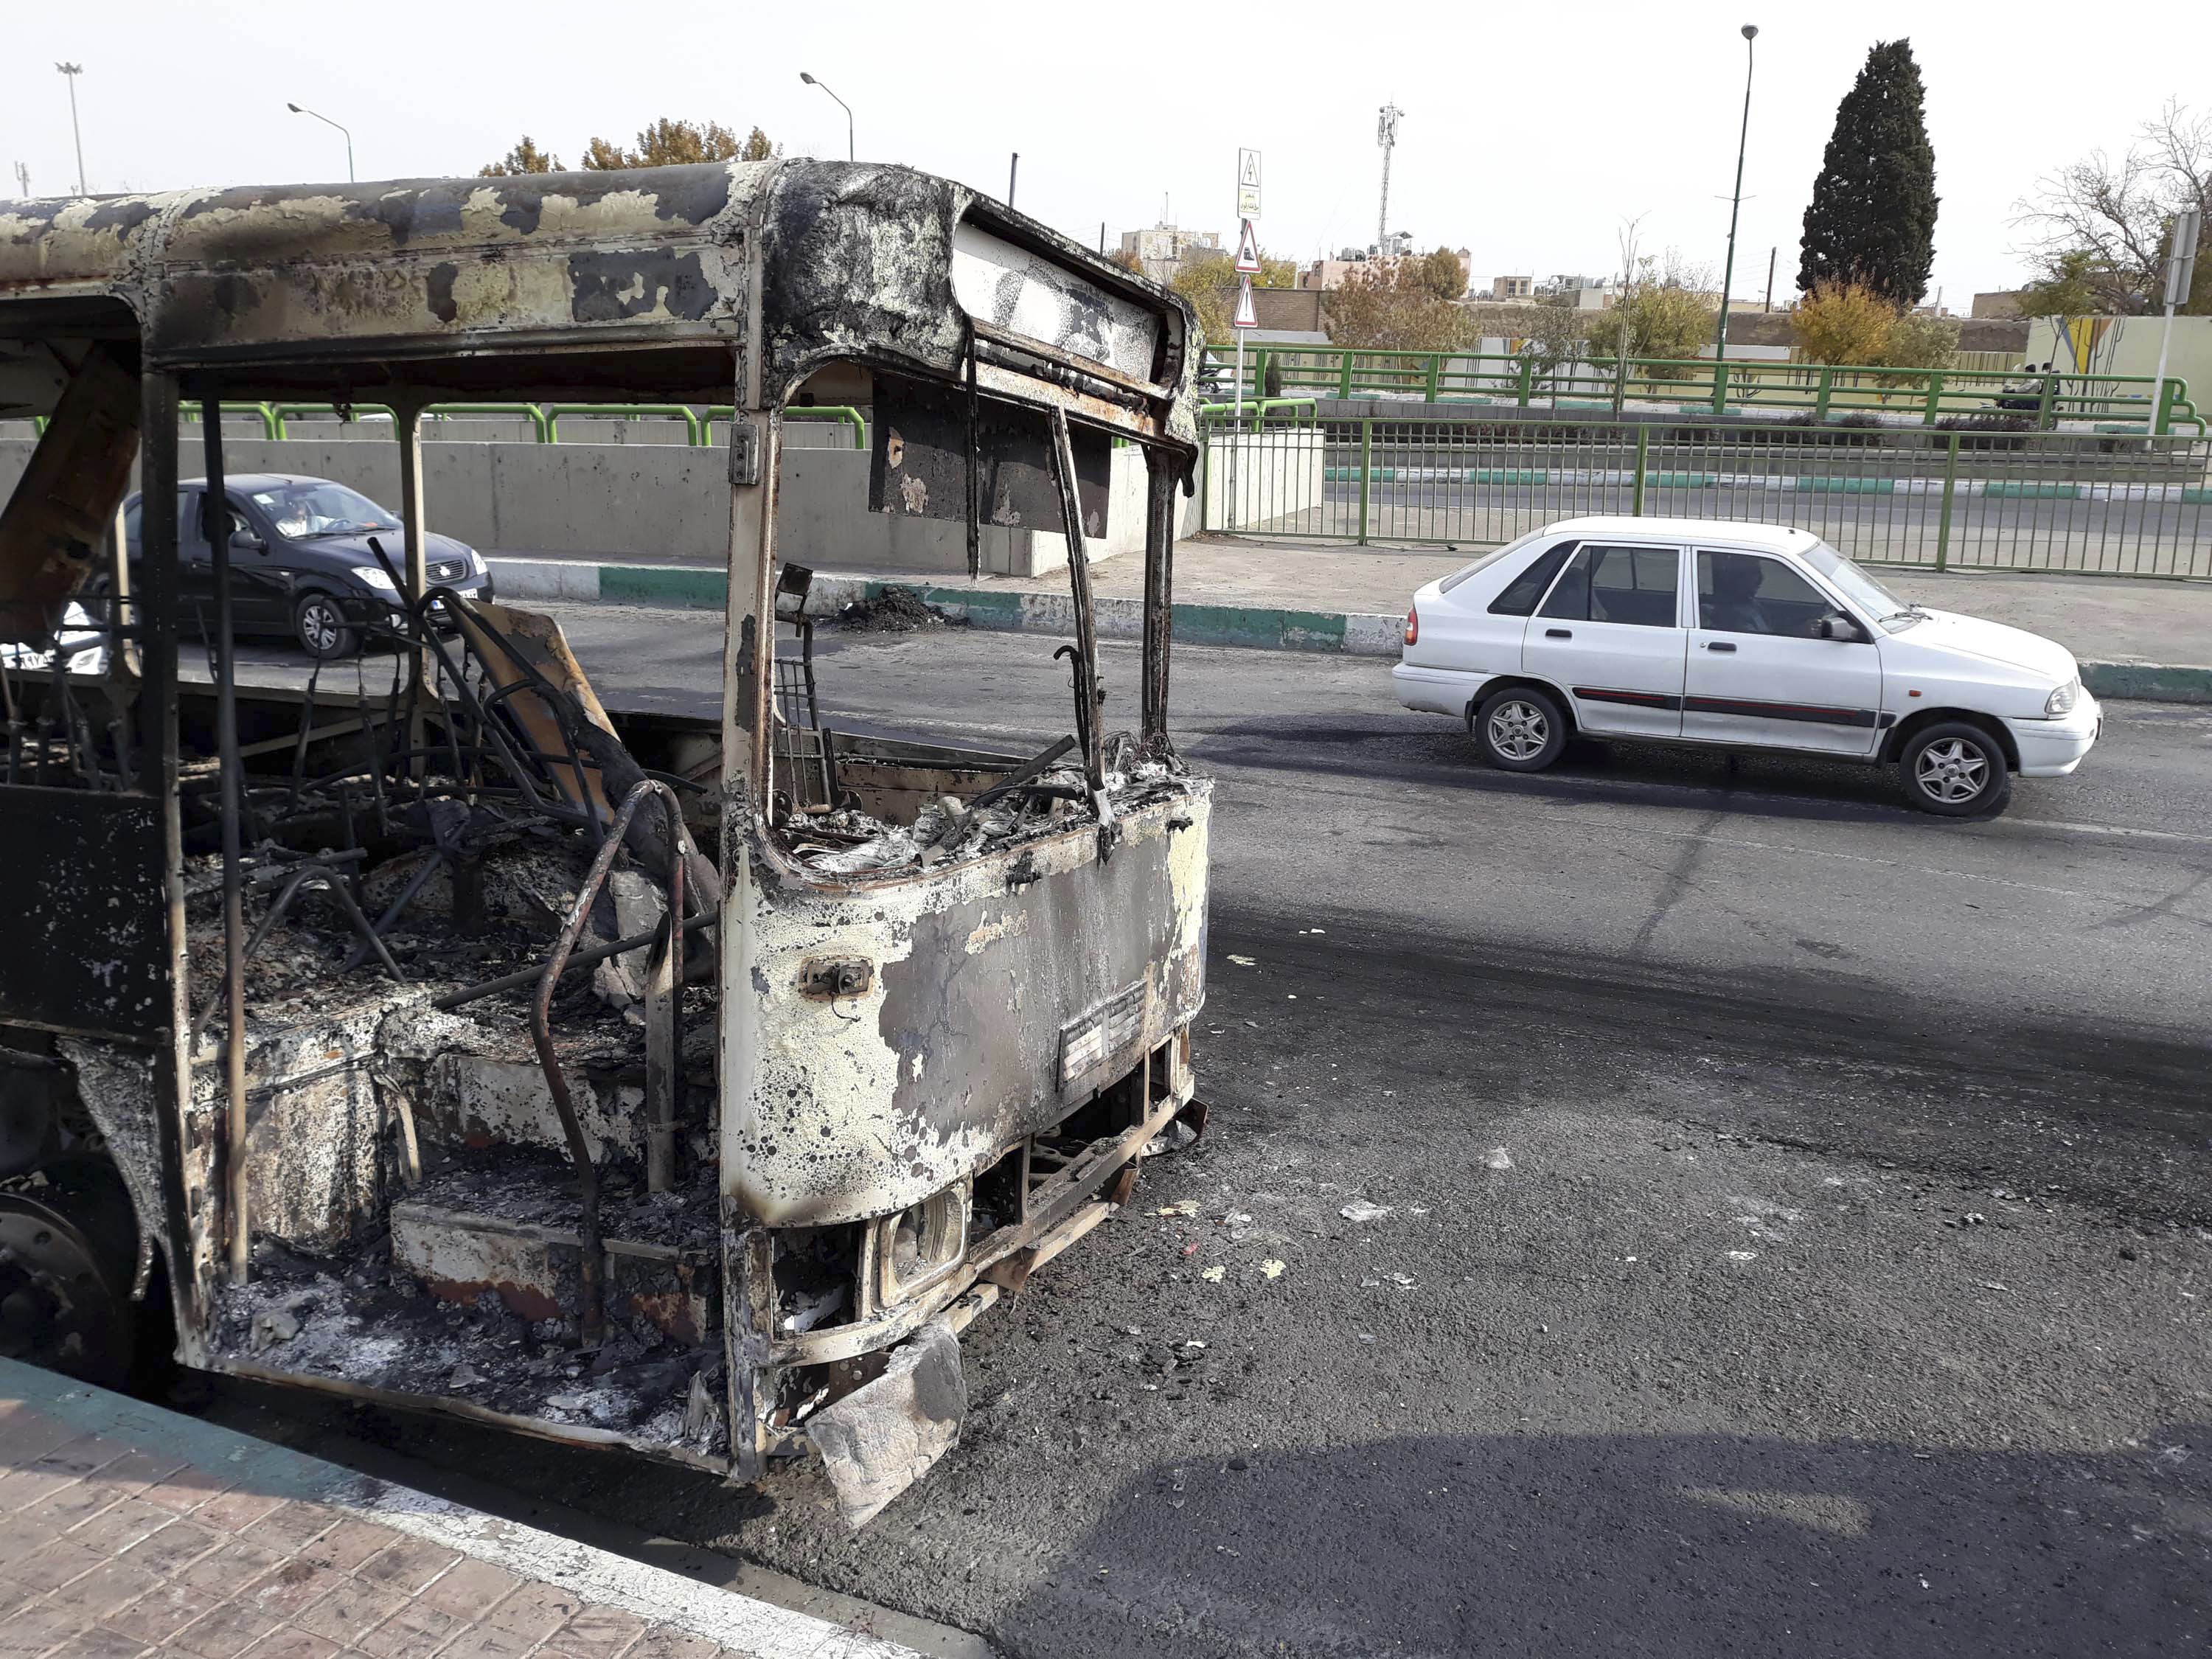 This photo released by the Iranian Students' News Agency, ISNA, shows cars drive past a scorched public bus that remained on the street after protests that followed authorities' decision to raise gasoline prices, in Tehran, Iran, Sunday, November 17, 2019. Photo: Morteza Zangane/ISNA via AP